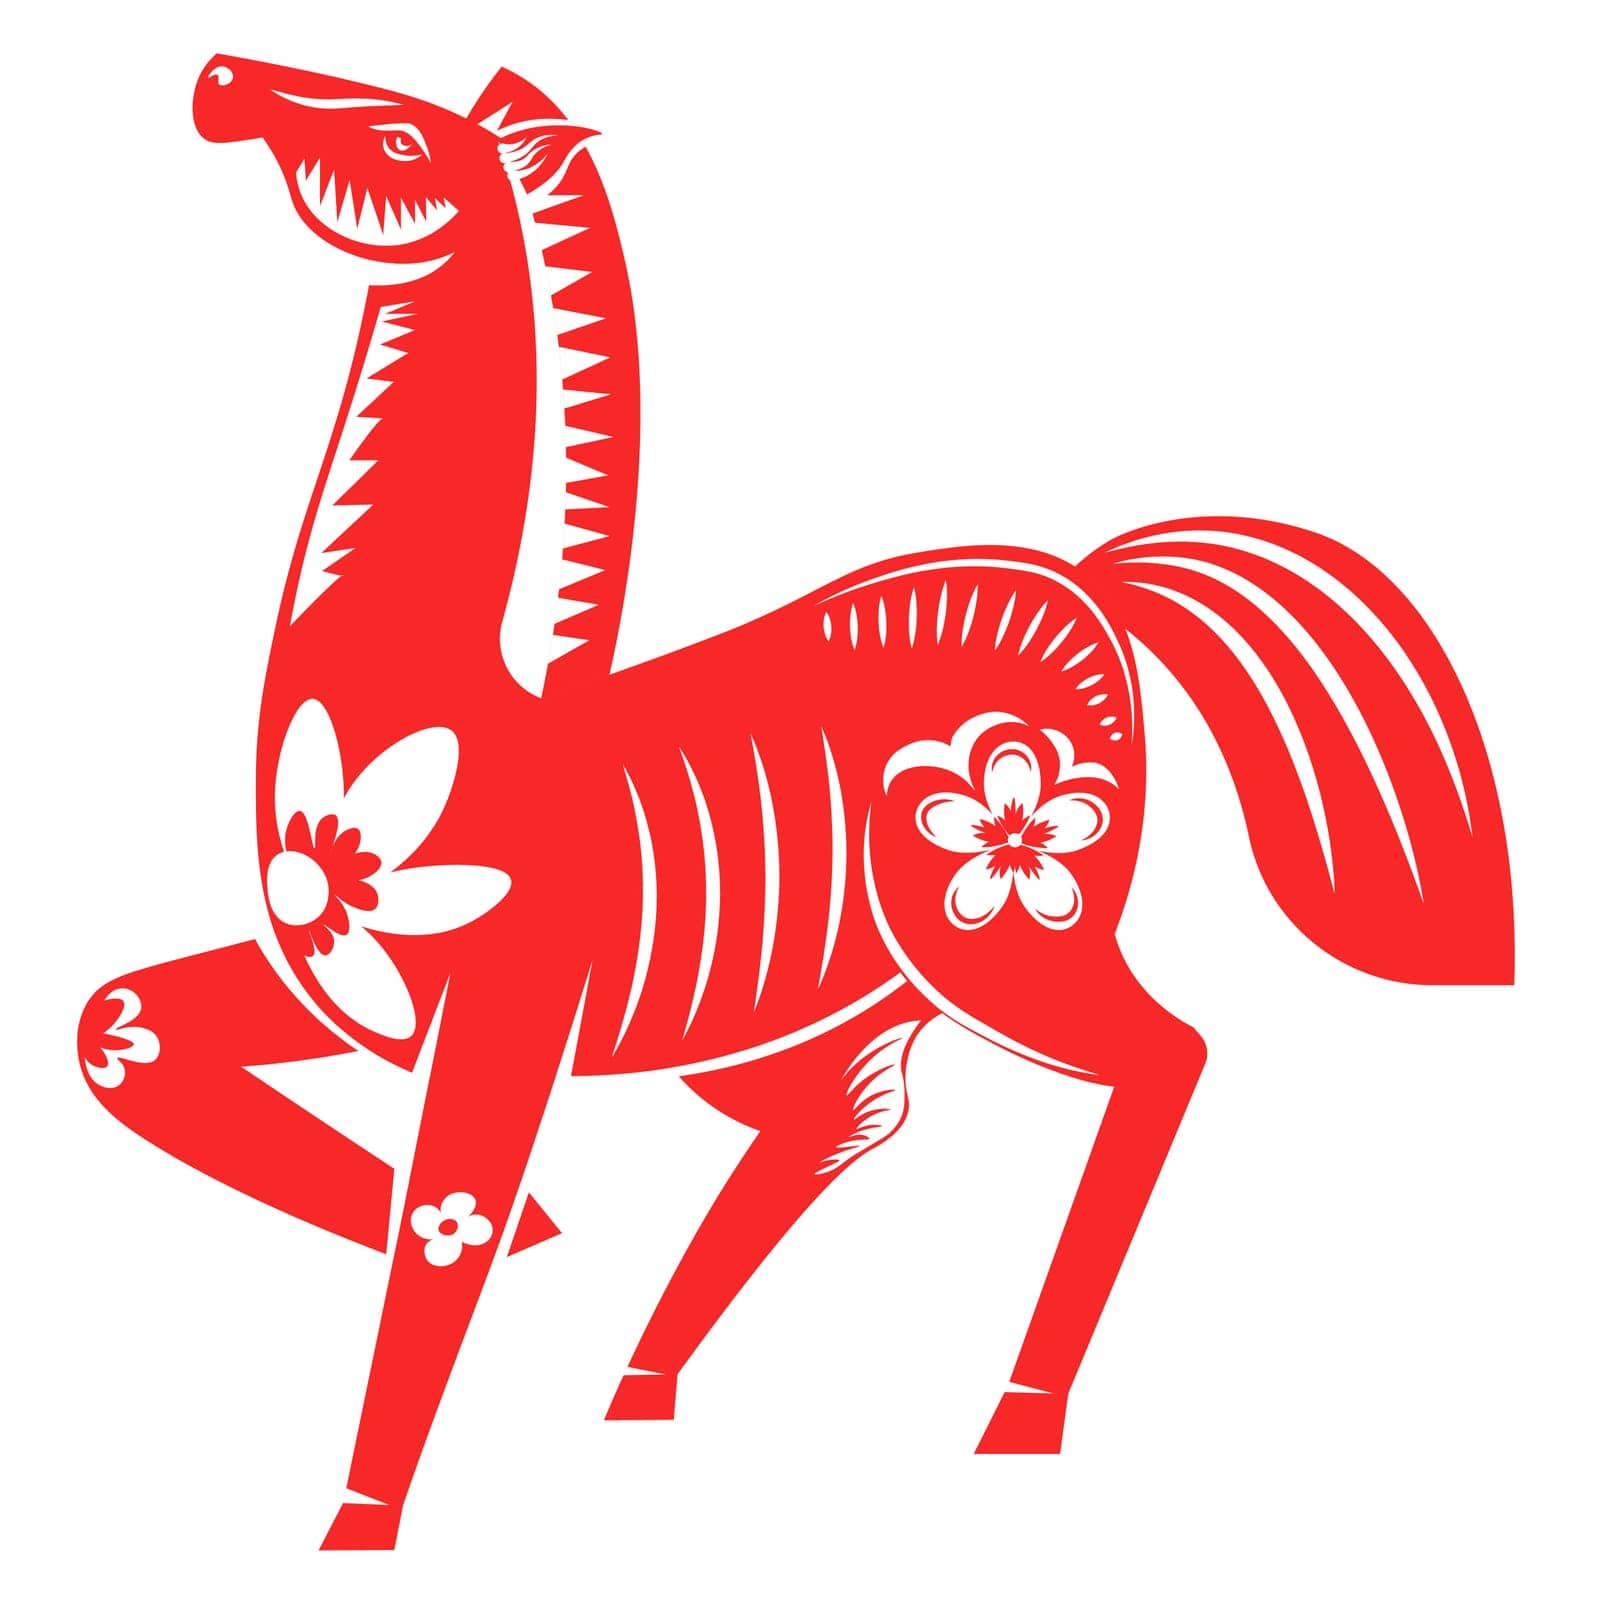 Asian astrological sign, isolated horse papercut decorated with blooming flowers. Fortune and prosperity for new year. Oriental culture. Chinese horoscope sign, red icon vector in flat style